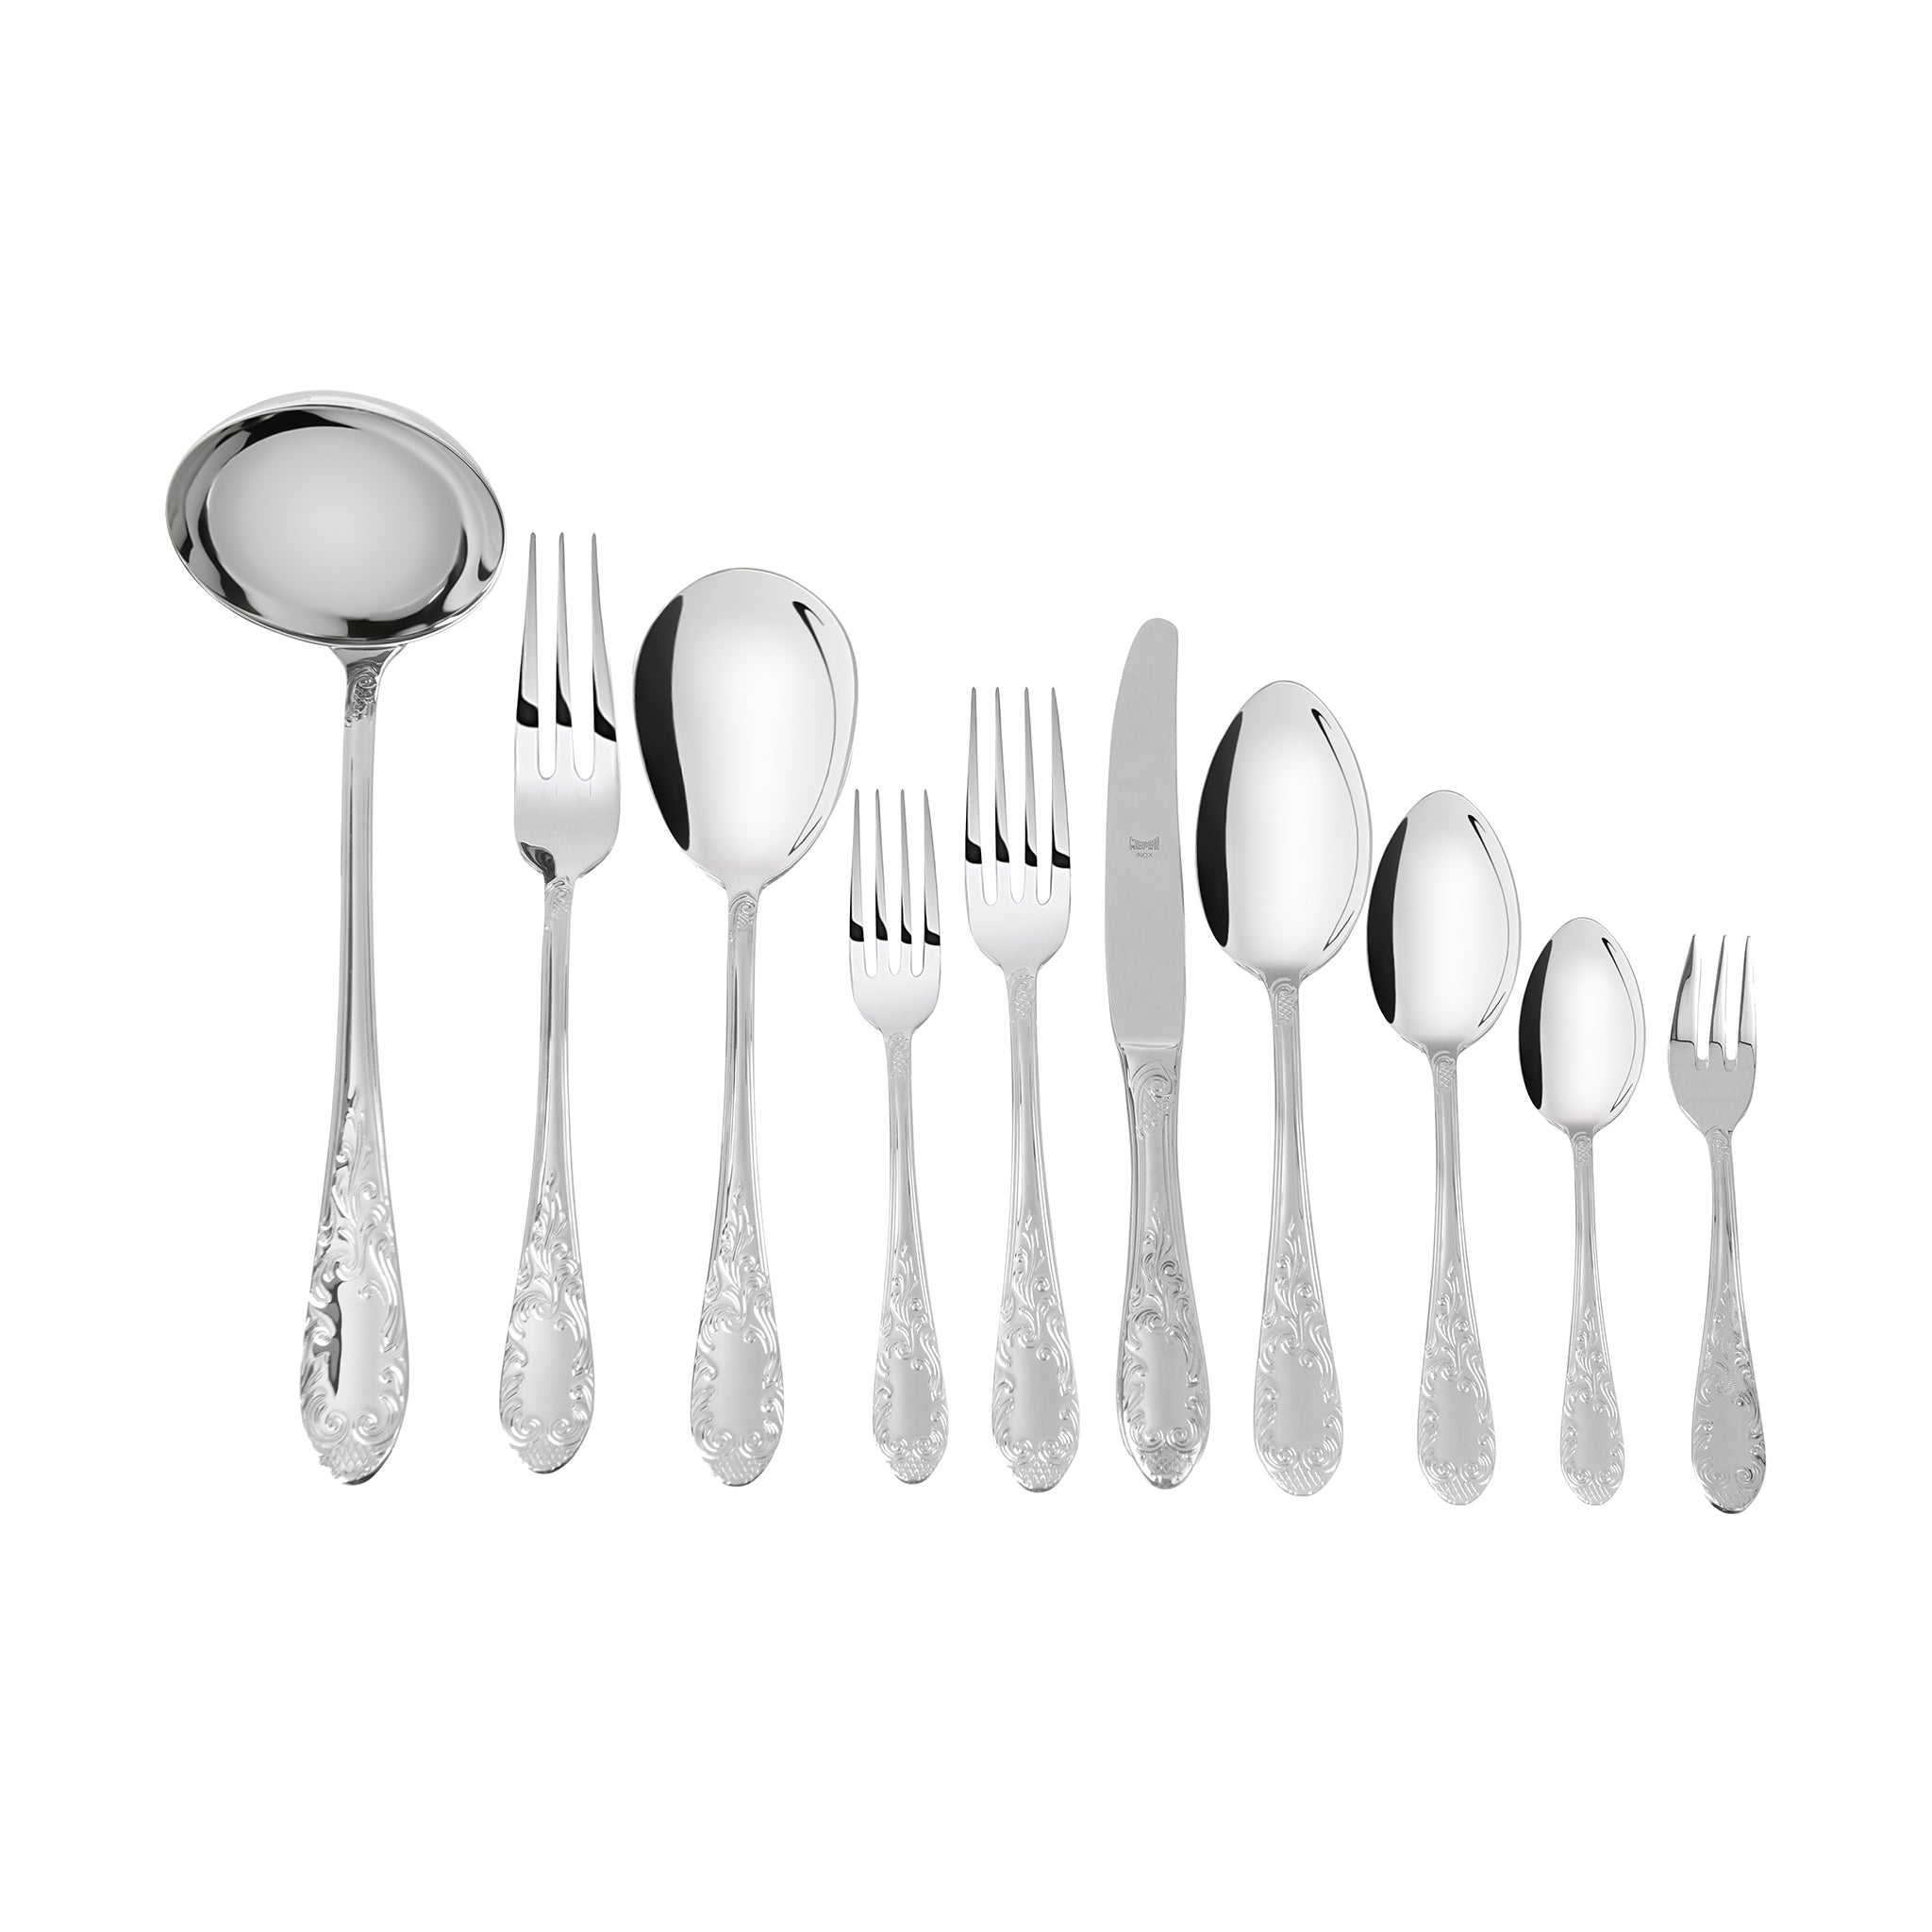 Mepra - Cutlery Set 99 Pieces - Stainless Steel - Silver - Wooden Box - 100002121